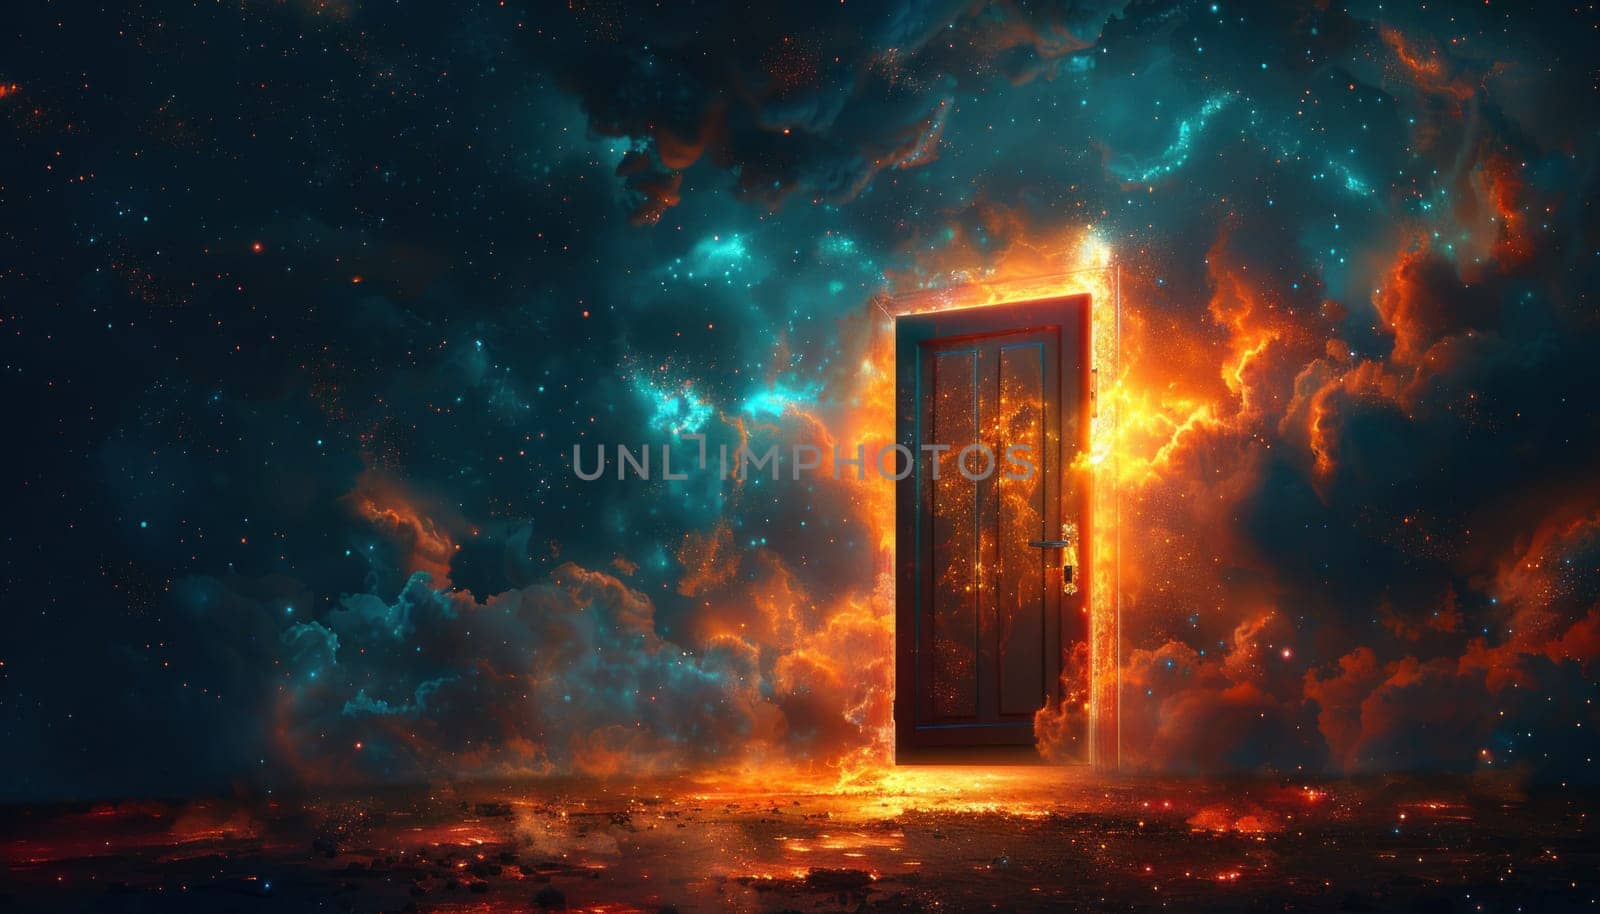 A door is open in a space filled with orange and blue clouds. The door is glowing and seems to be a portal to another world